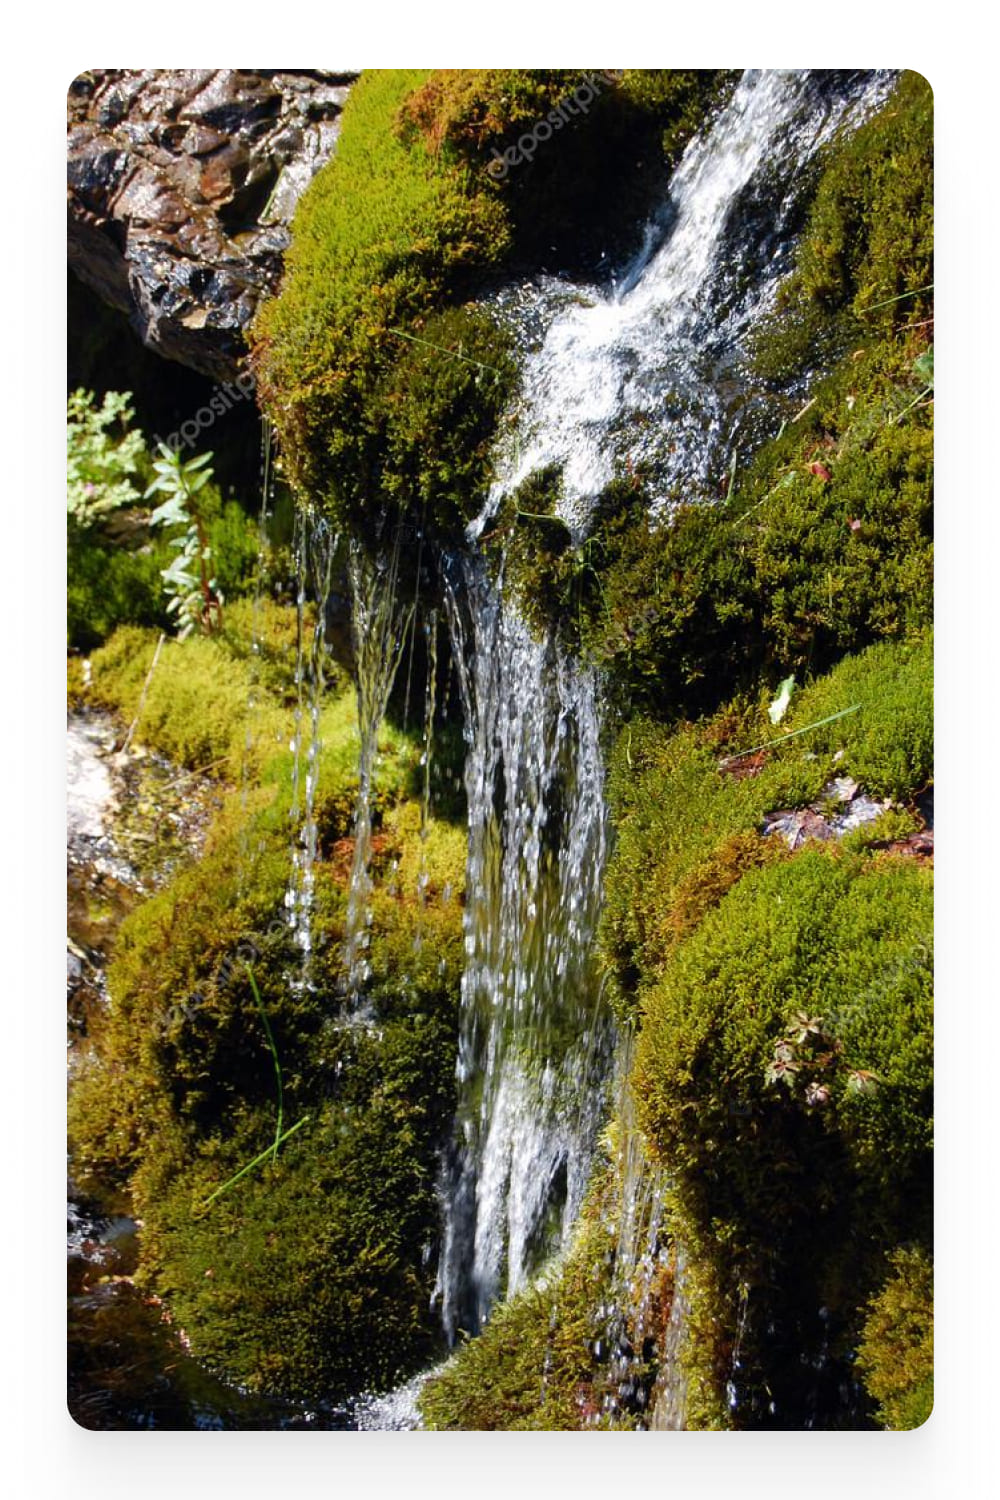 Photo of a small waterfall between moss.